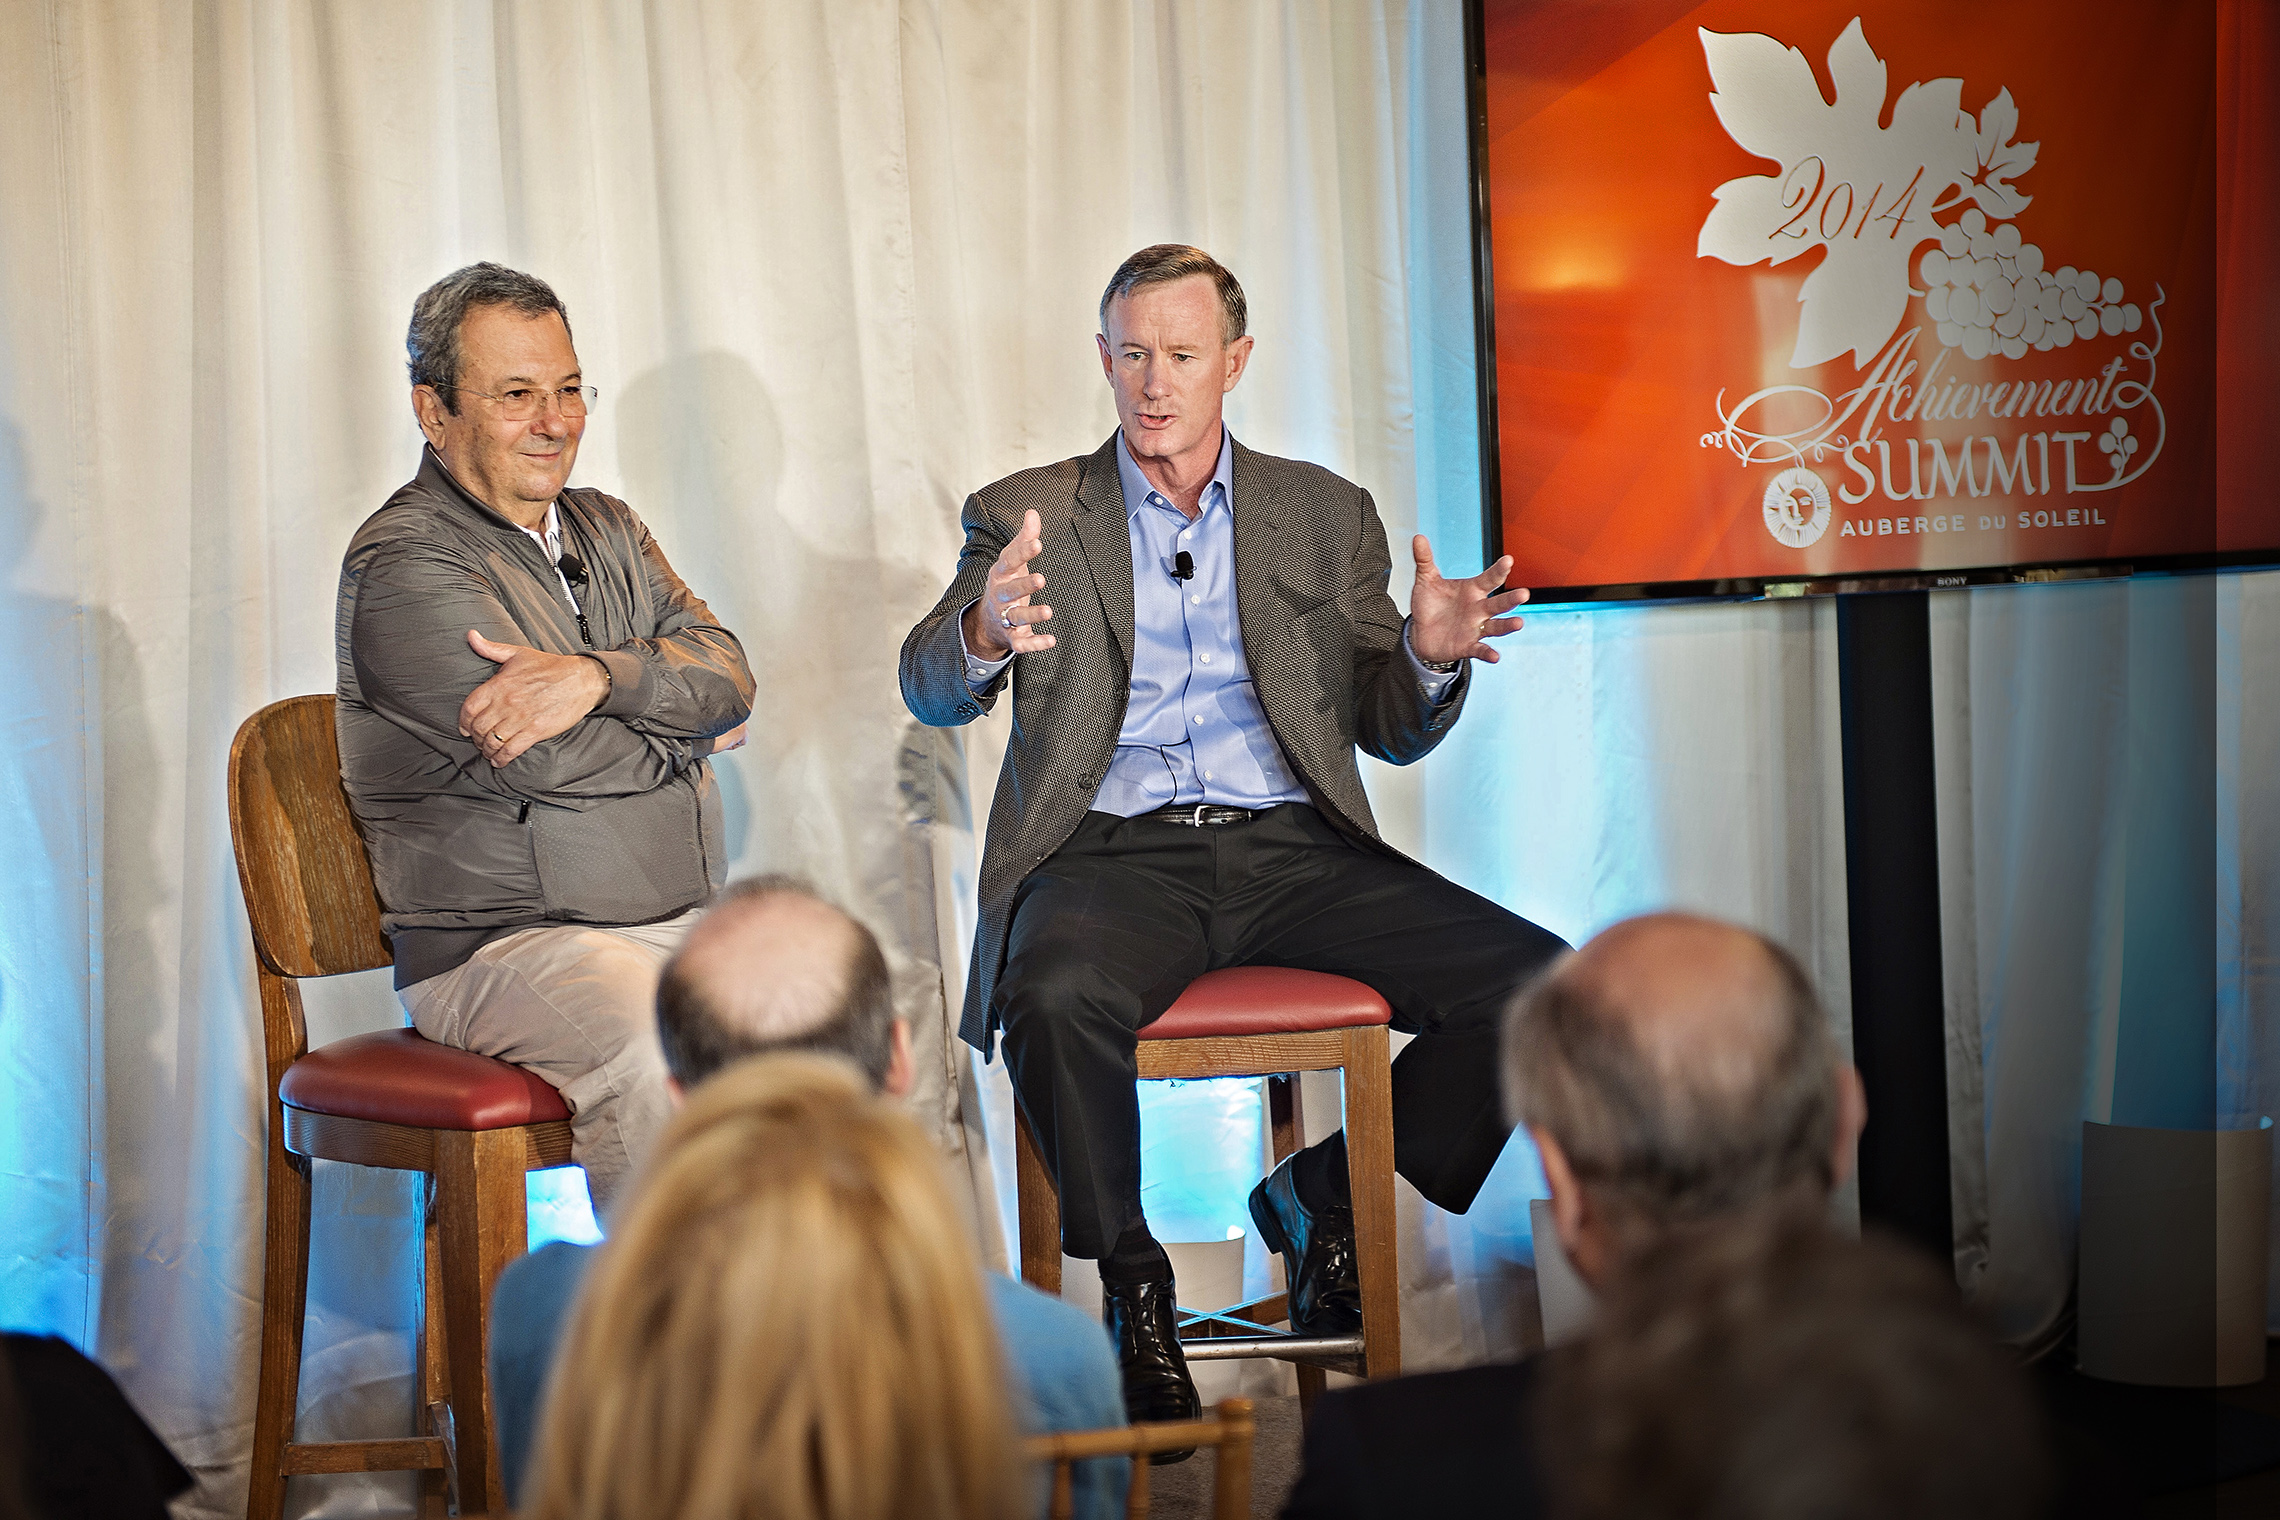 Academy member and former Israeli Prime Minister Ehud Barak discusses the civil war in Syria and the threat of ISIS with Admiral William McRaven at the 2014 International Achievement Summit in Napa Valley, California.